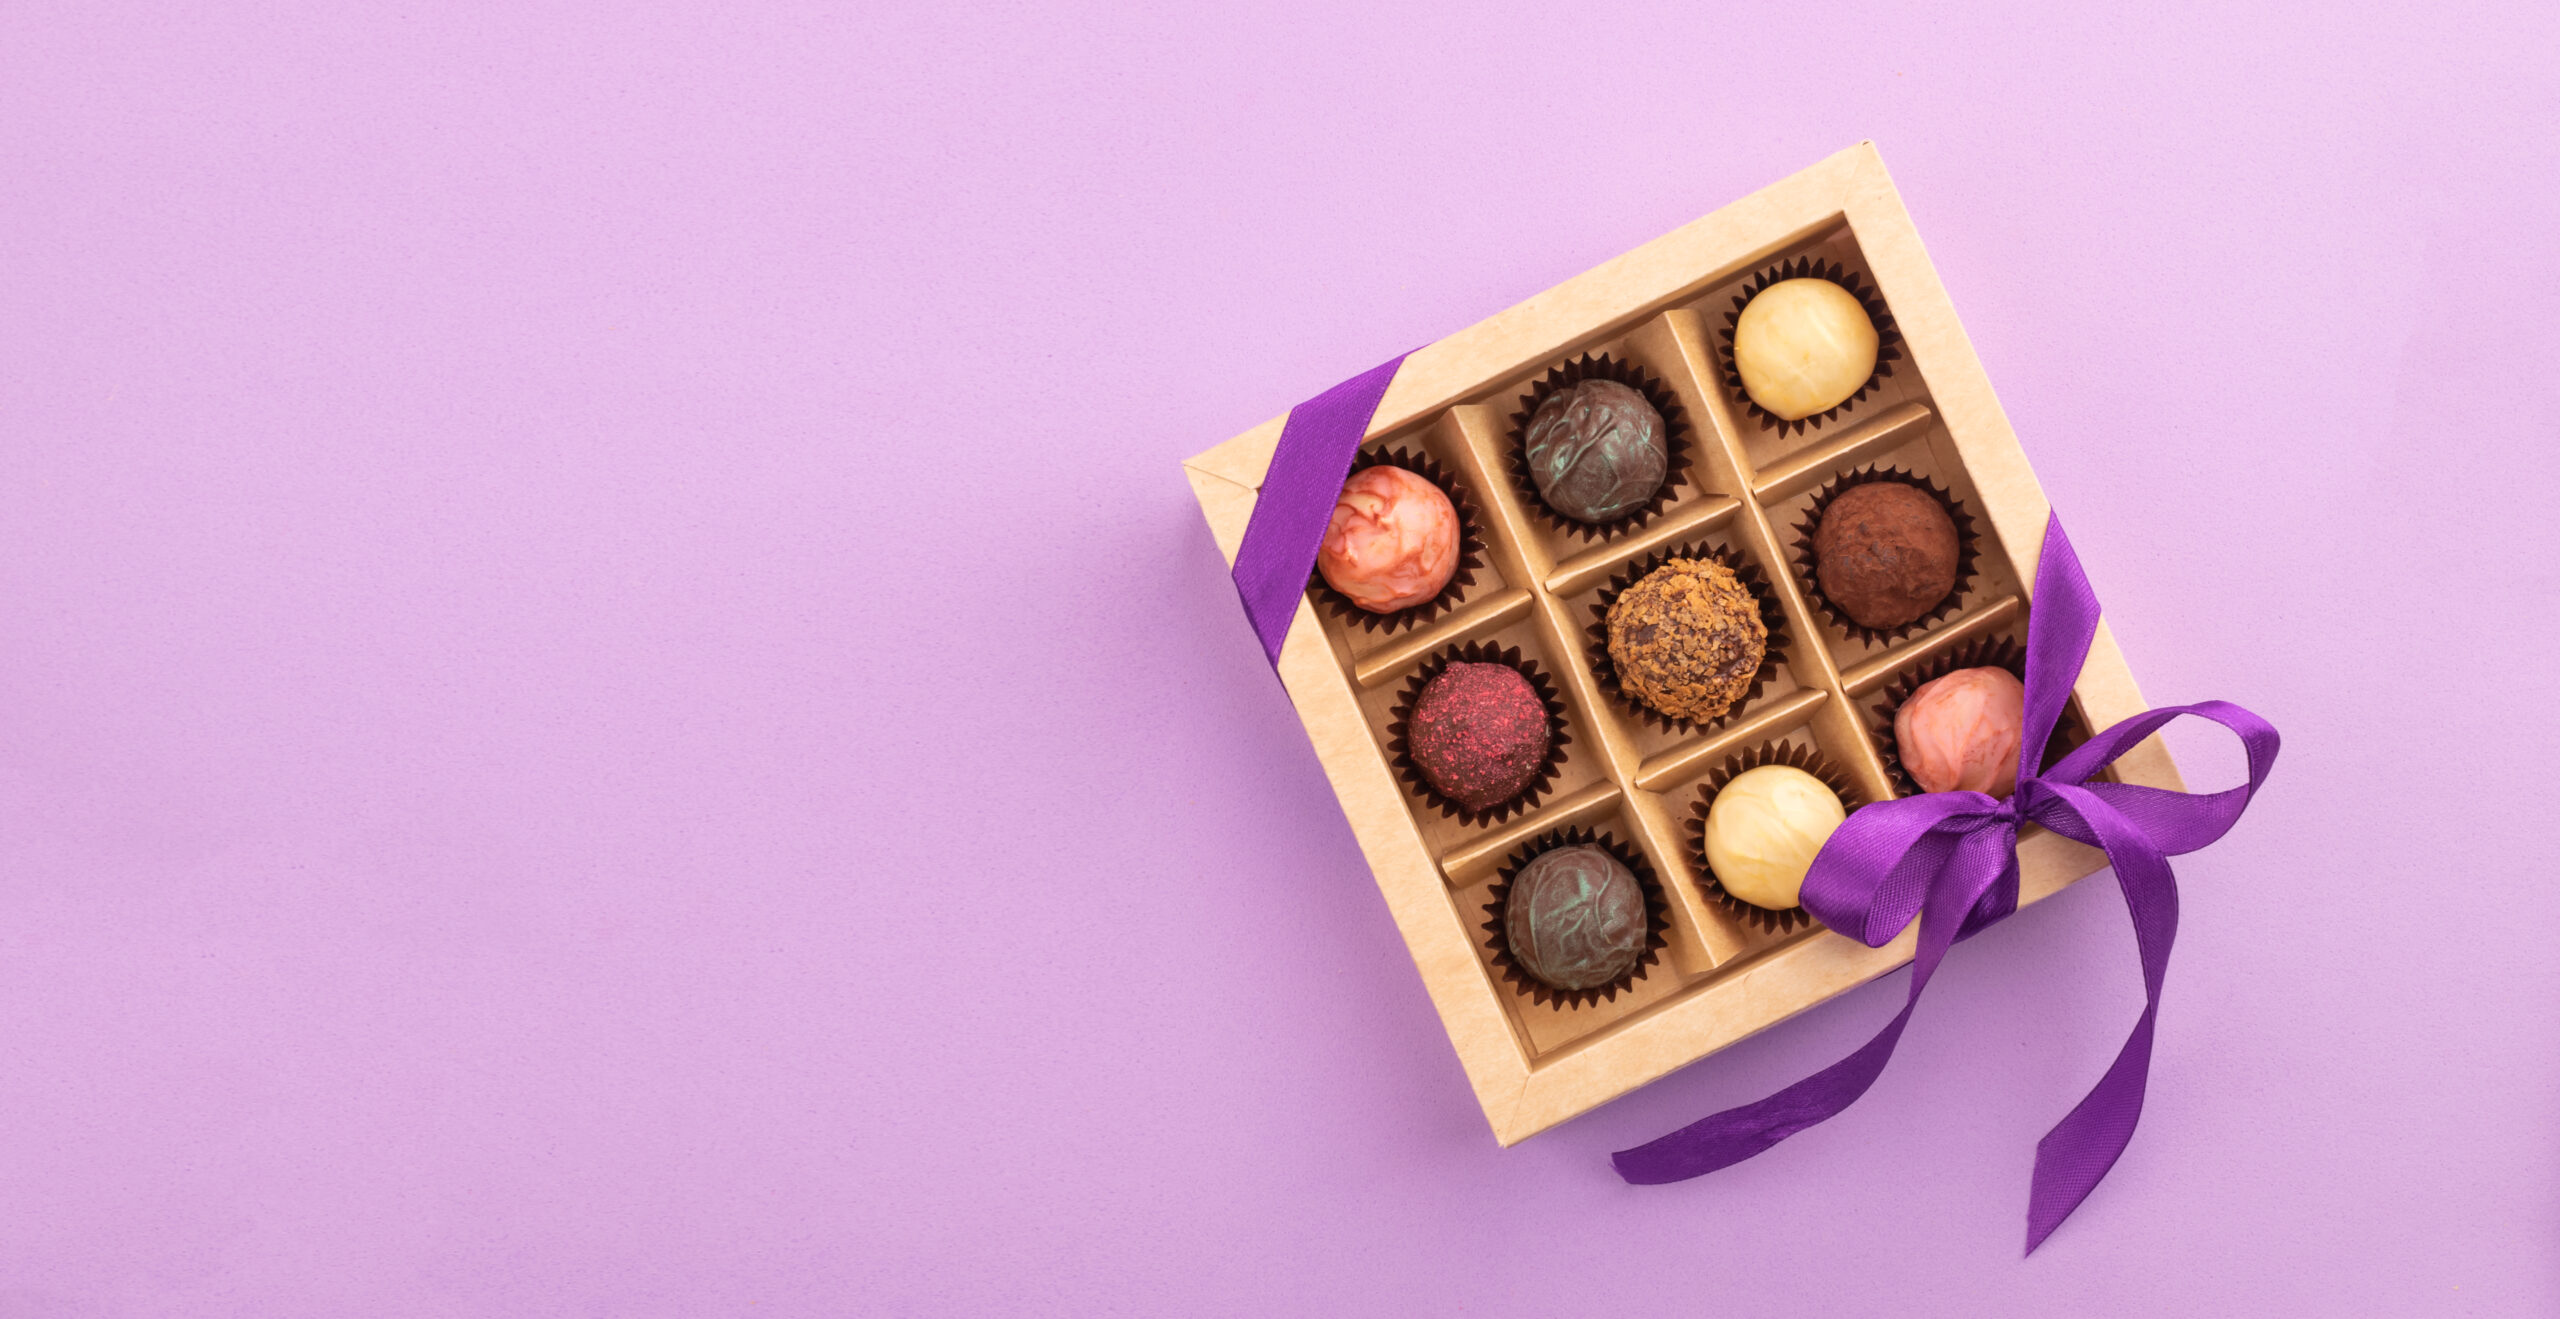 Chocolate Box Fundraising and the New Digital Way